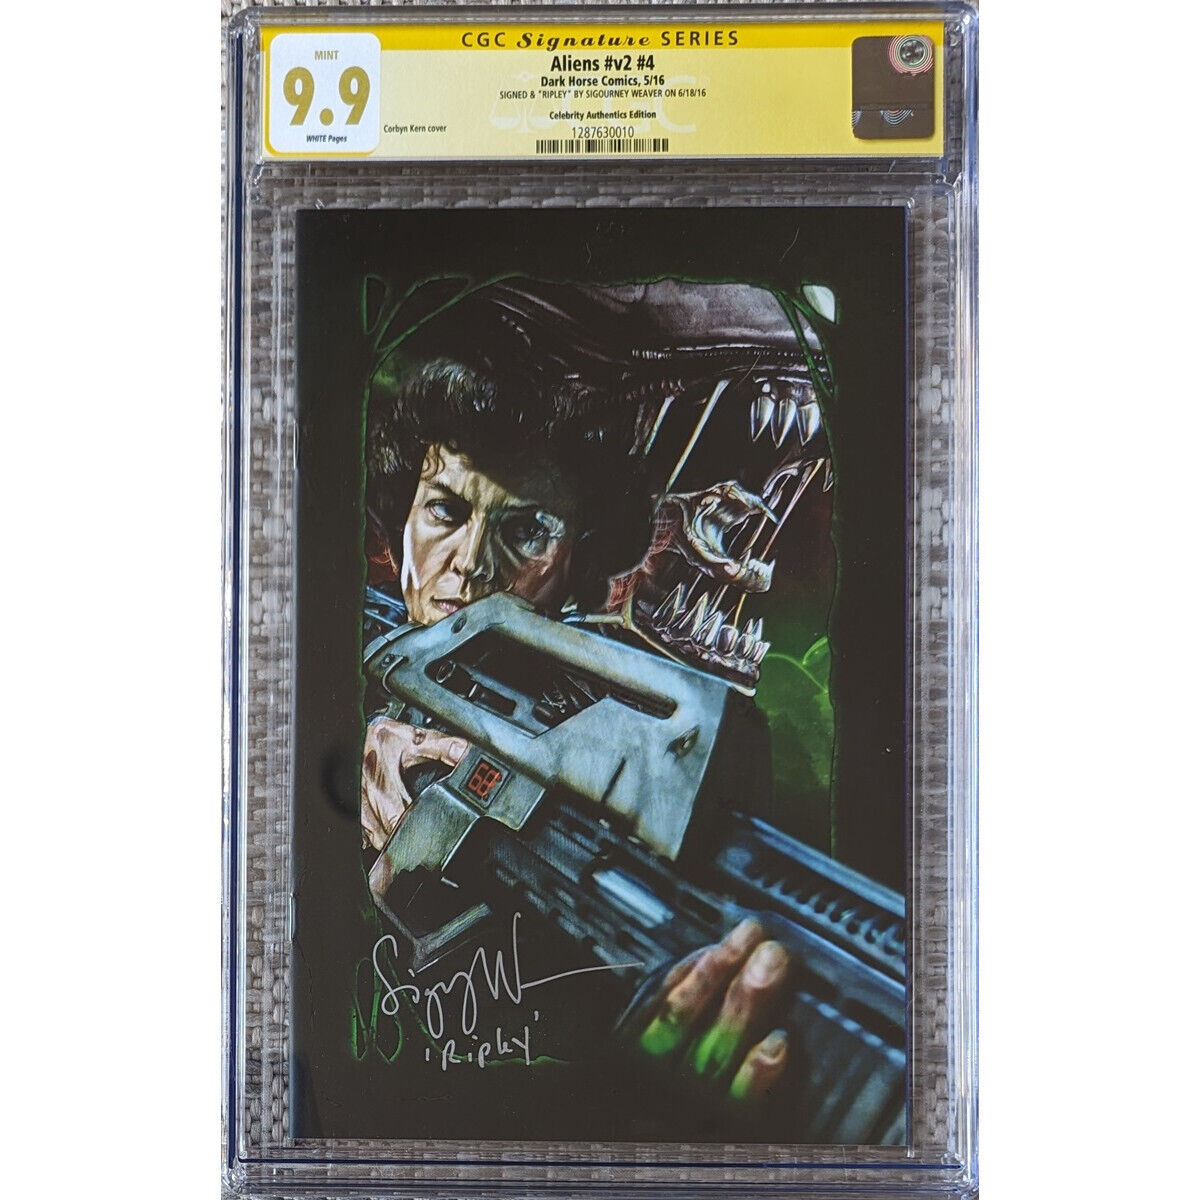 Aliens v2 #4 variant__CGC 9.9 MINT SS__Signed by Sigourney Weaver w/ \